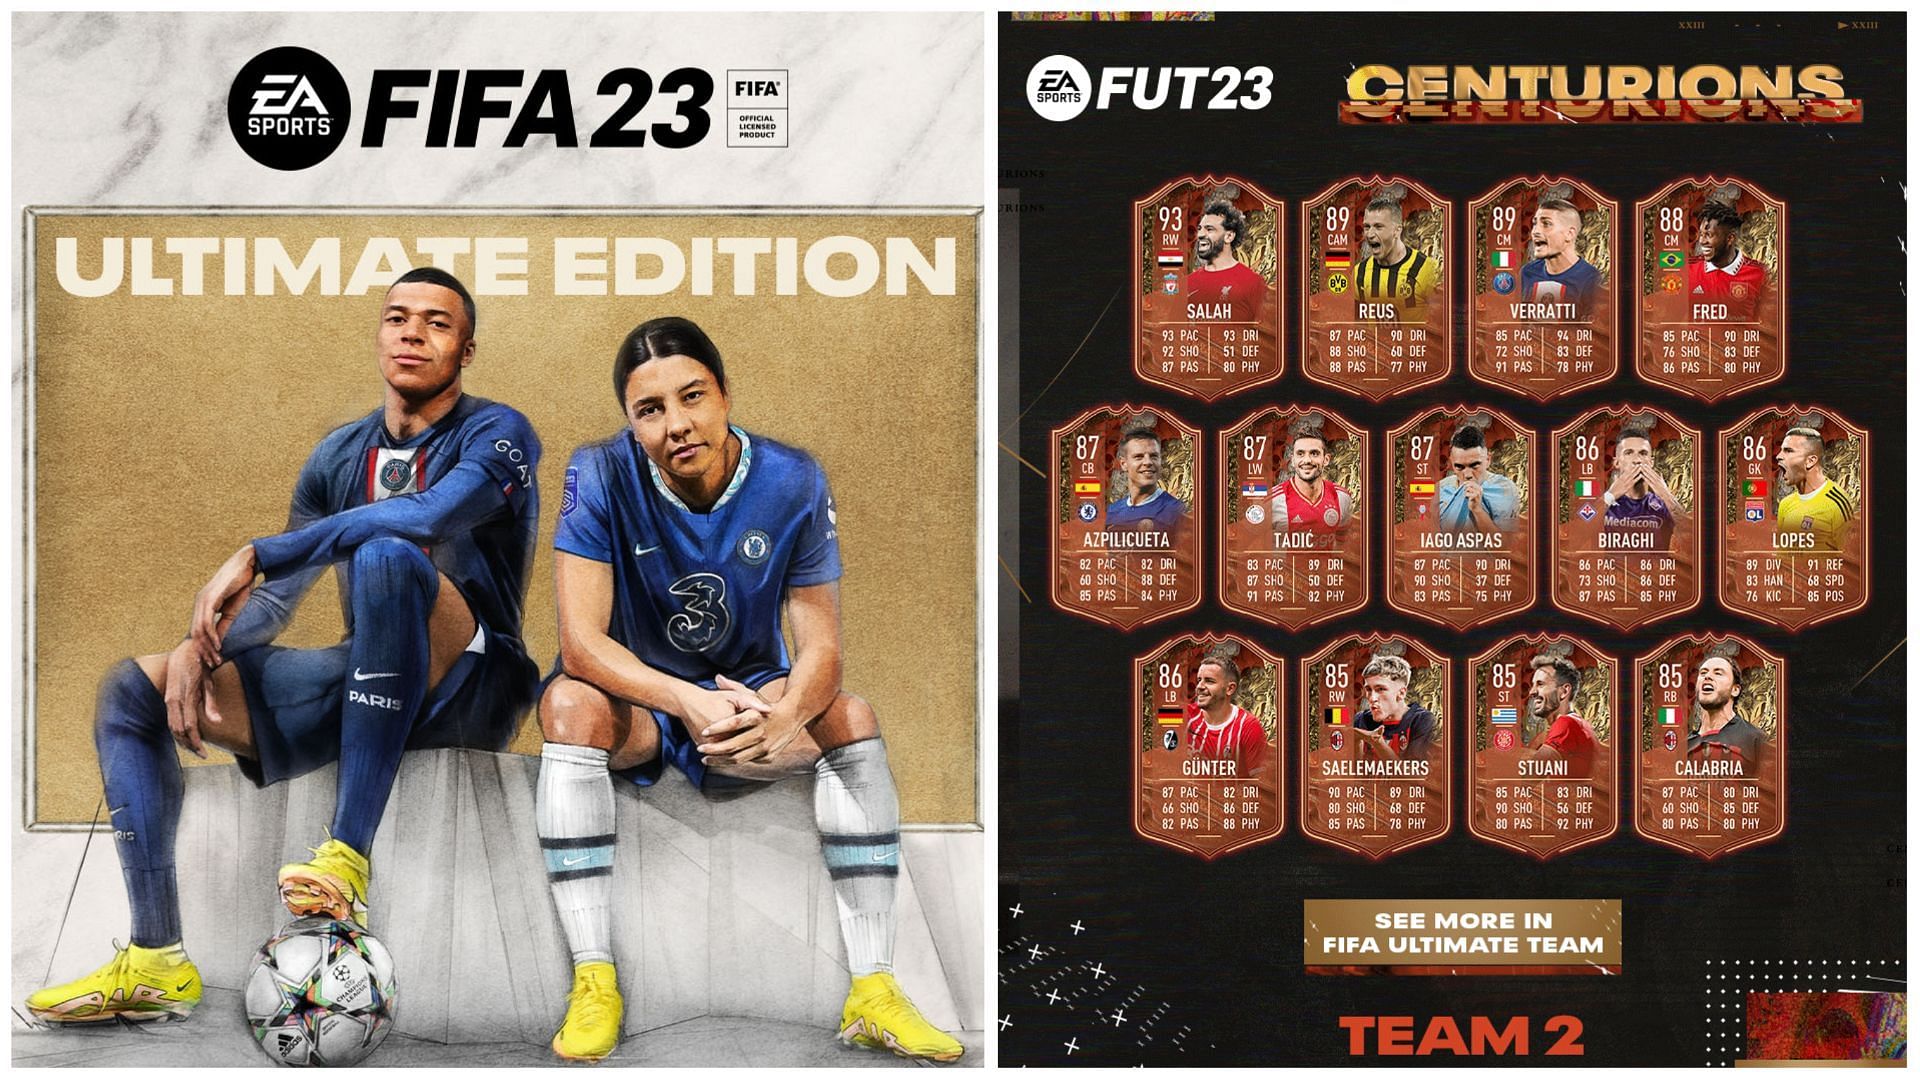 FUT Centurions Team 2 is live in FIFA 23 (Images via EA Sports)